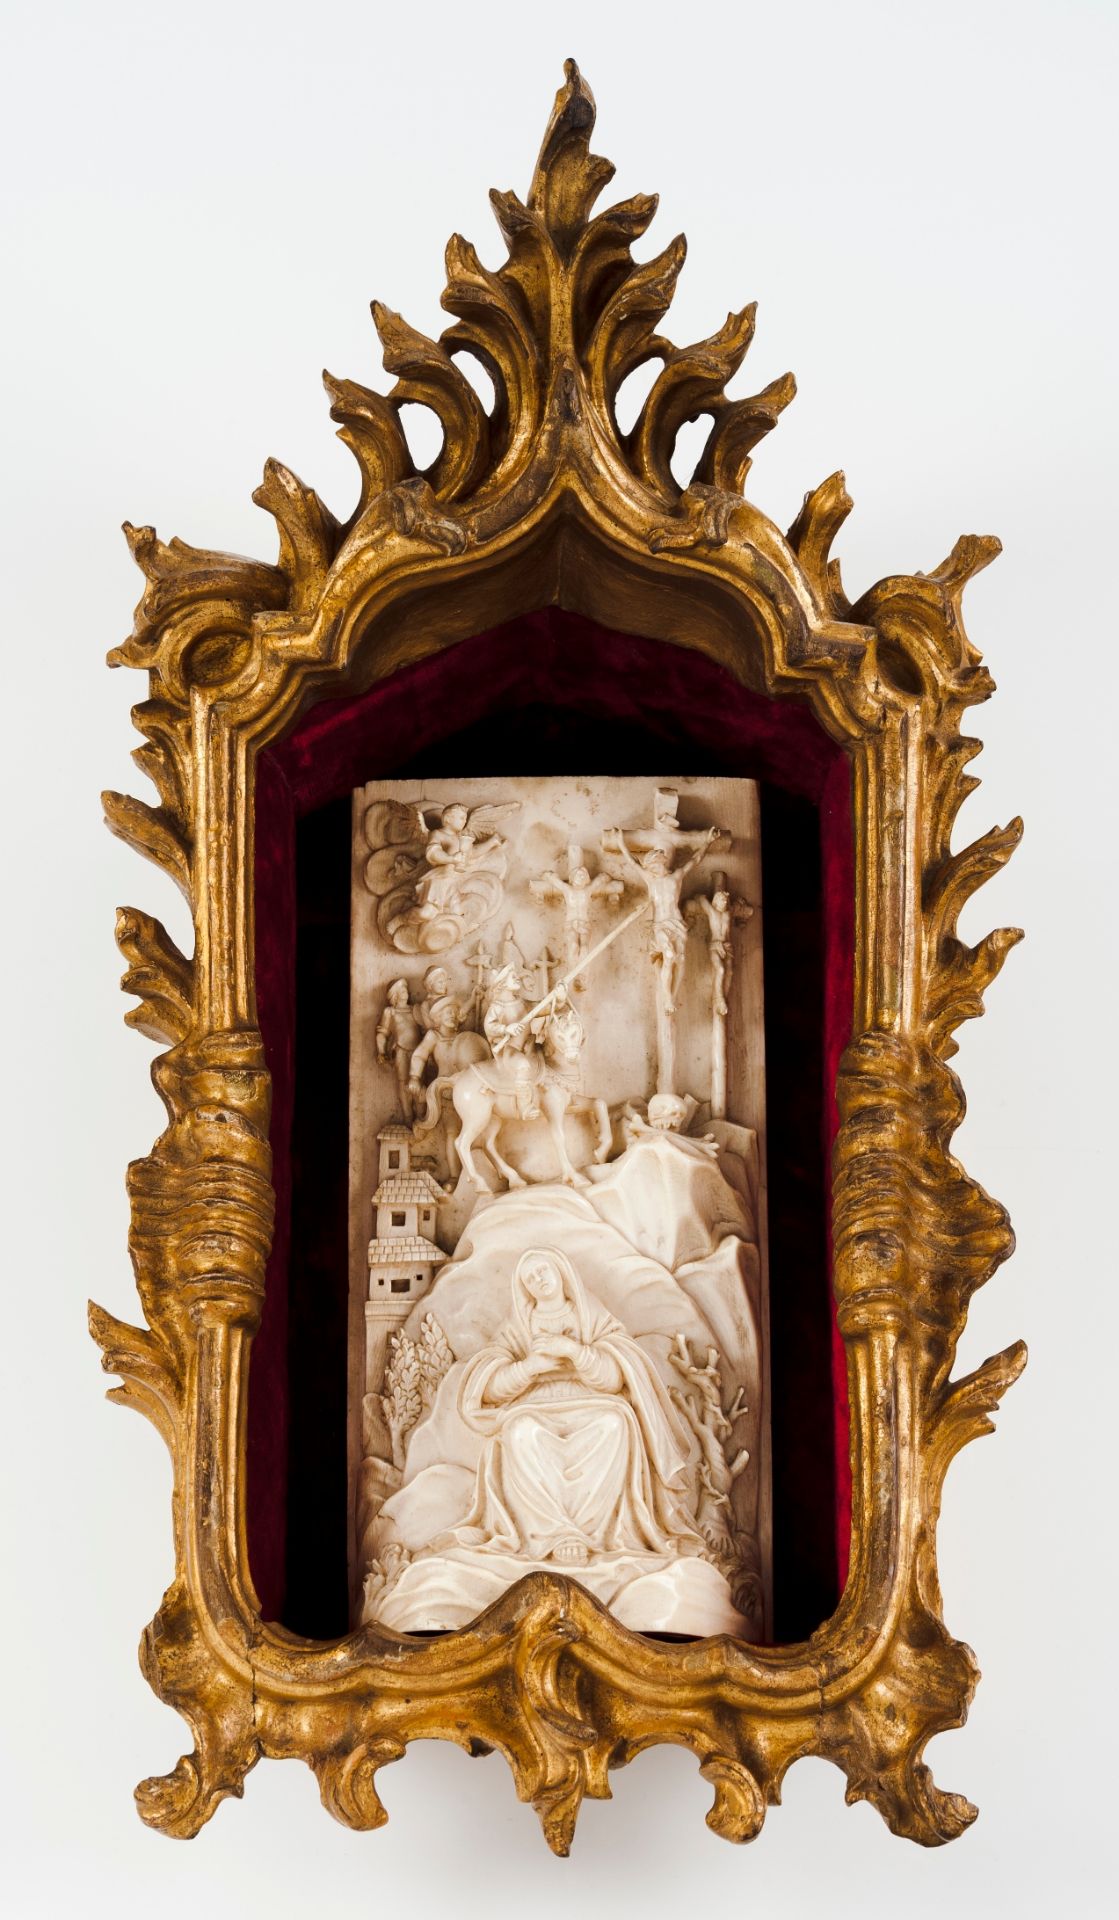 Crucifixion of JesusIn carved ivory representing the Virgin Mary and scene of the Passion of Chr